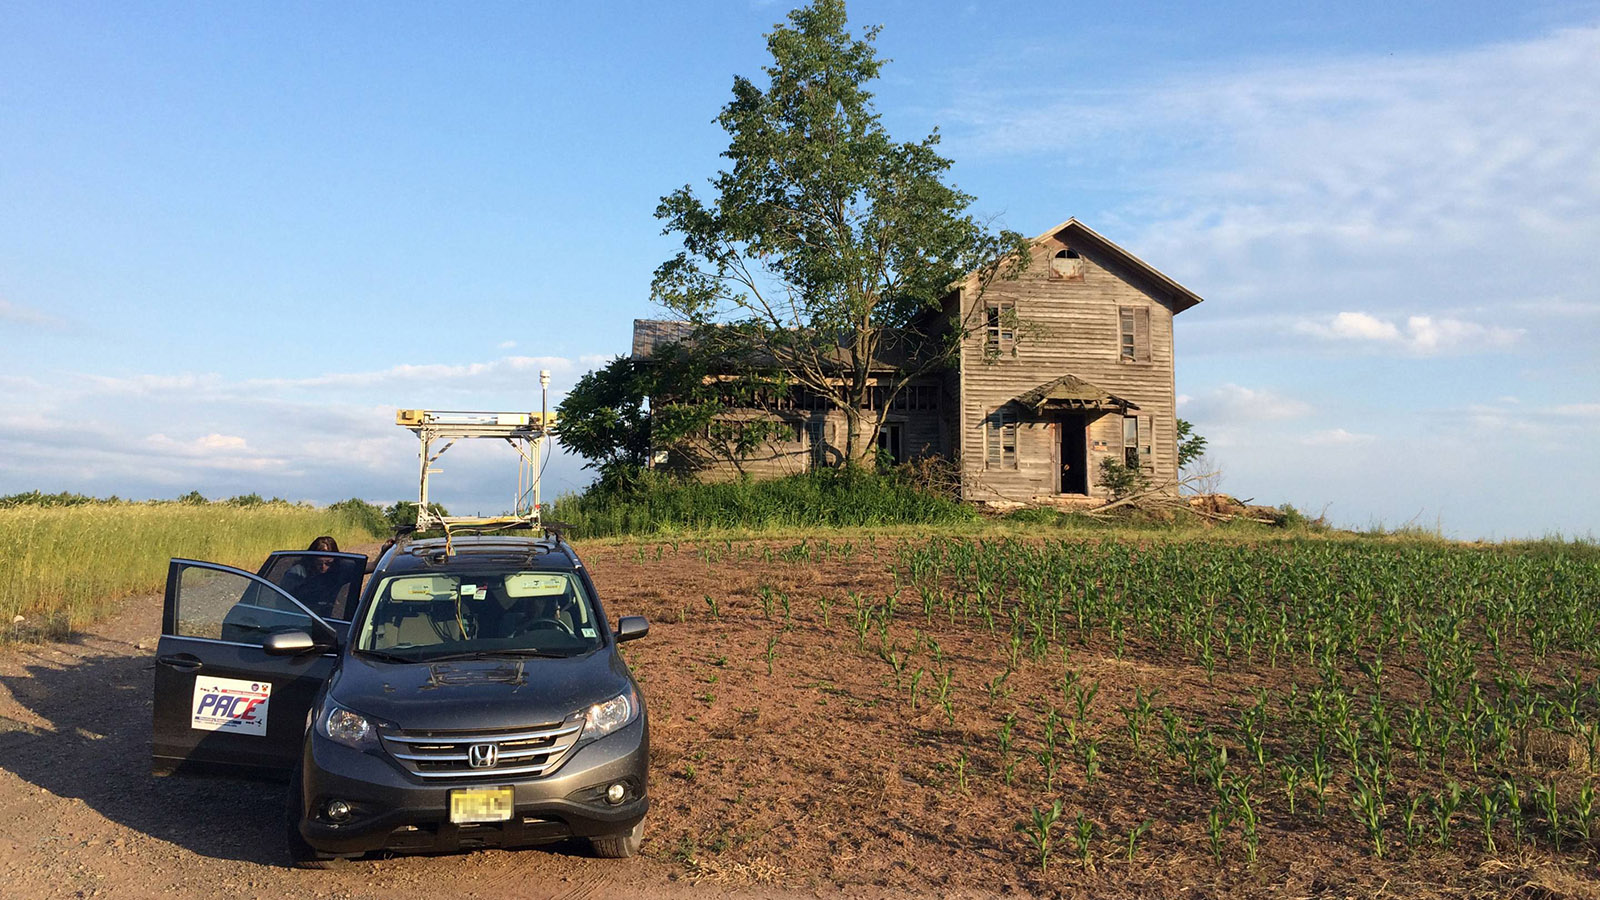 Car mounted with sensing equipment sits in field in front of weathered farmhouse